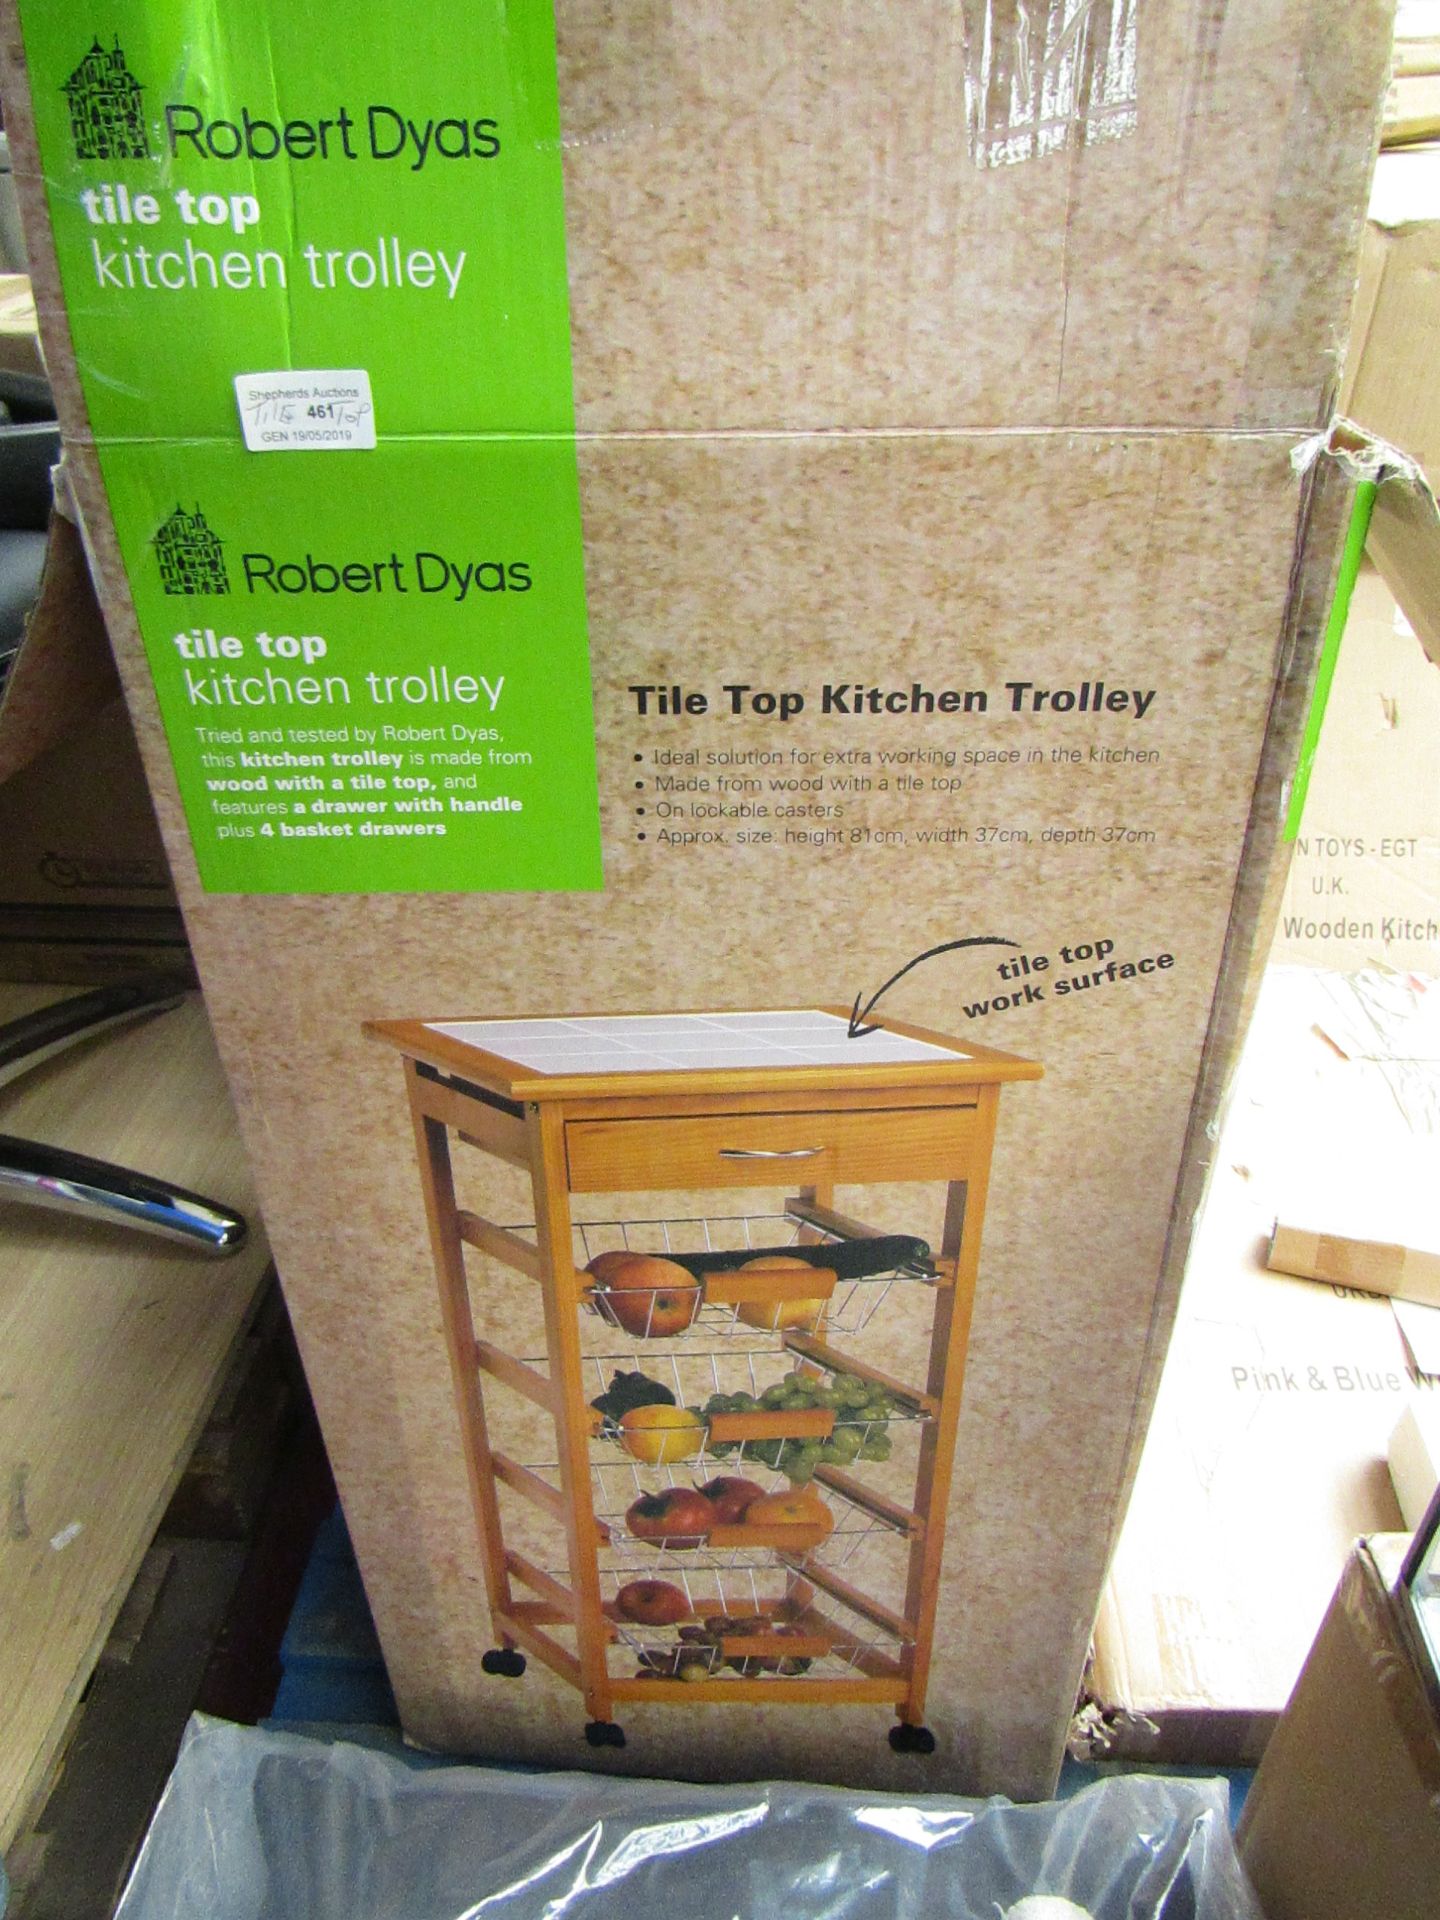 Tile Top Kitchen Trolley boxed unchecked